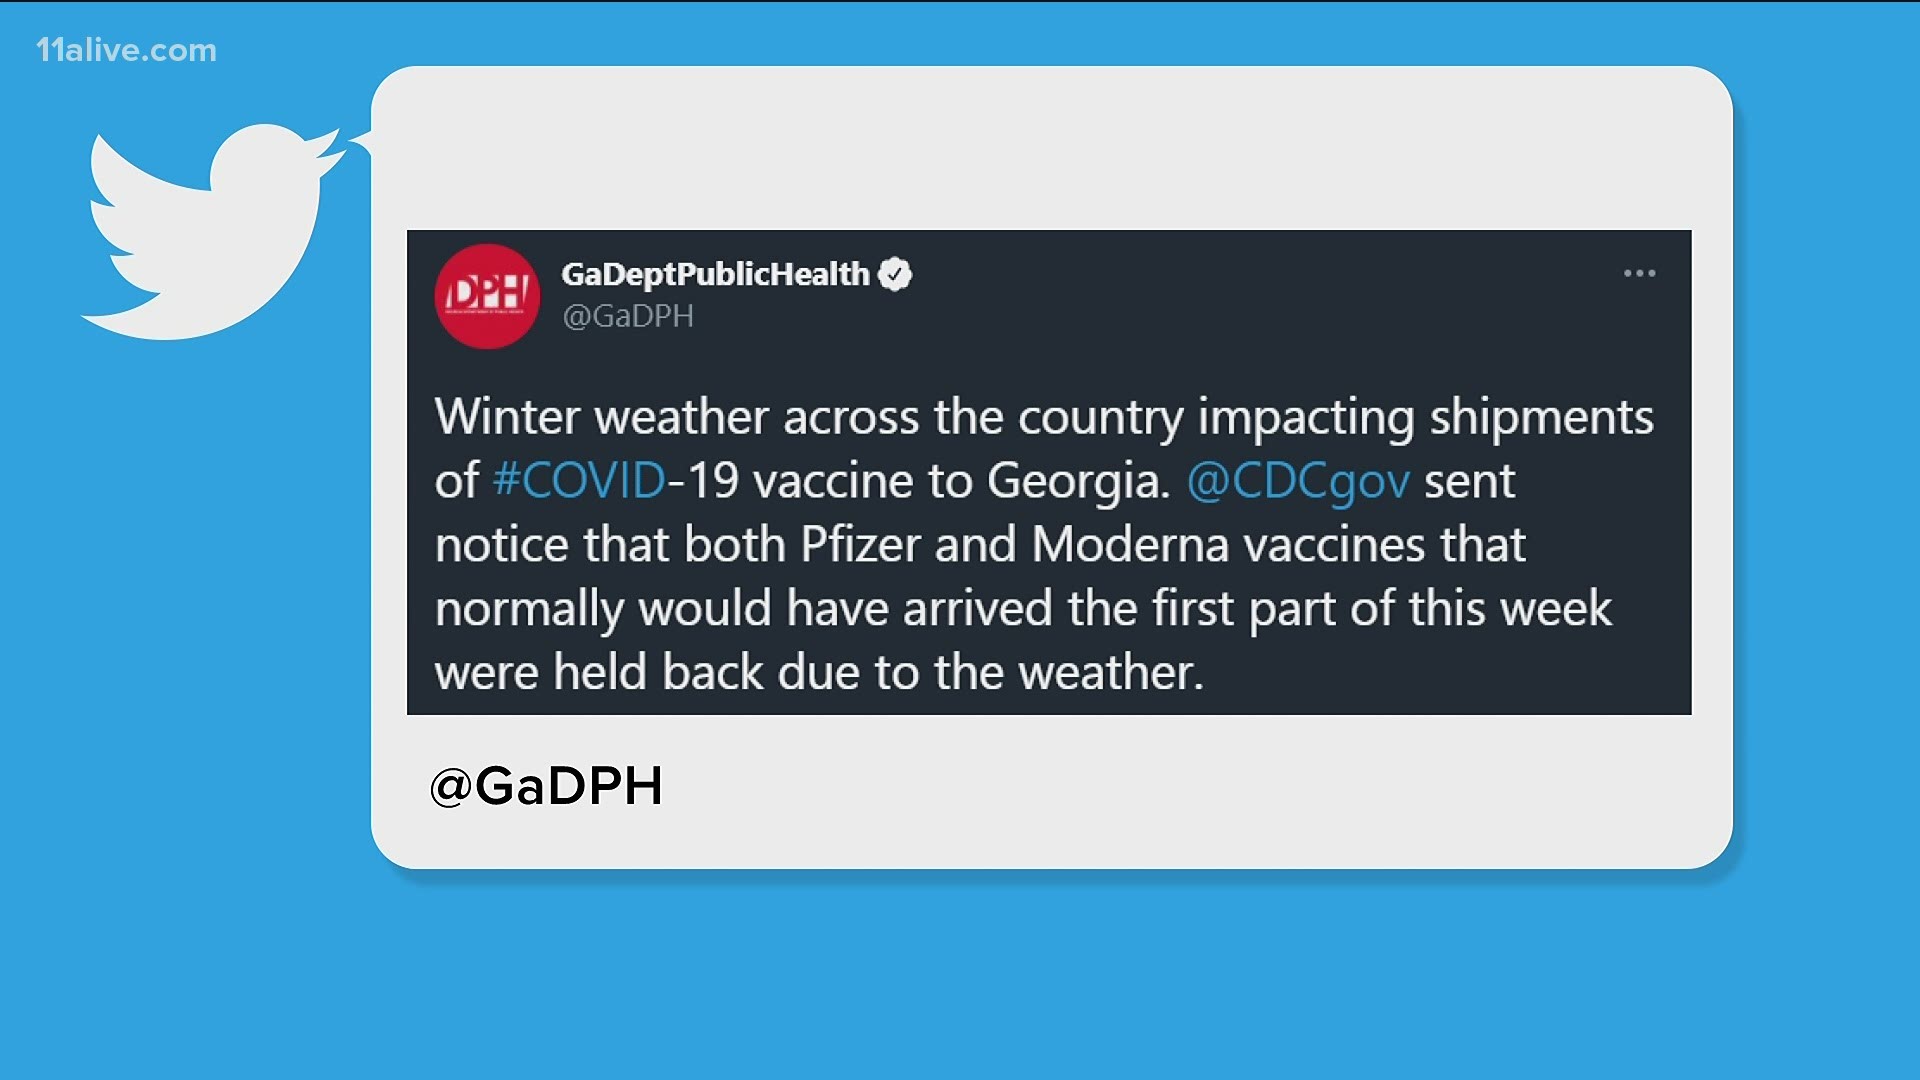 It's been a slow process already, and the winter storms impacting the majority of the country has slowed down vaccine shipments.